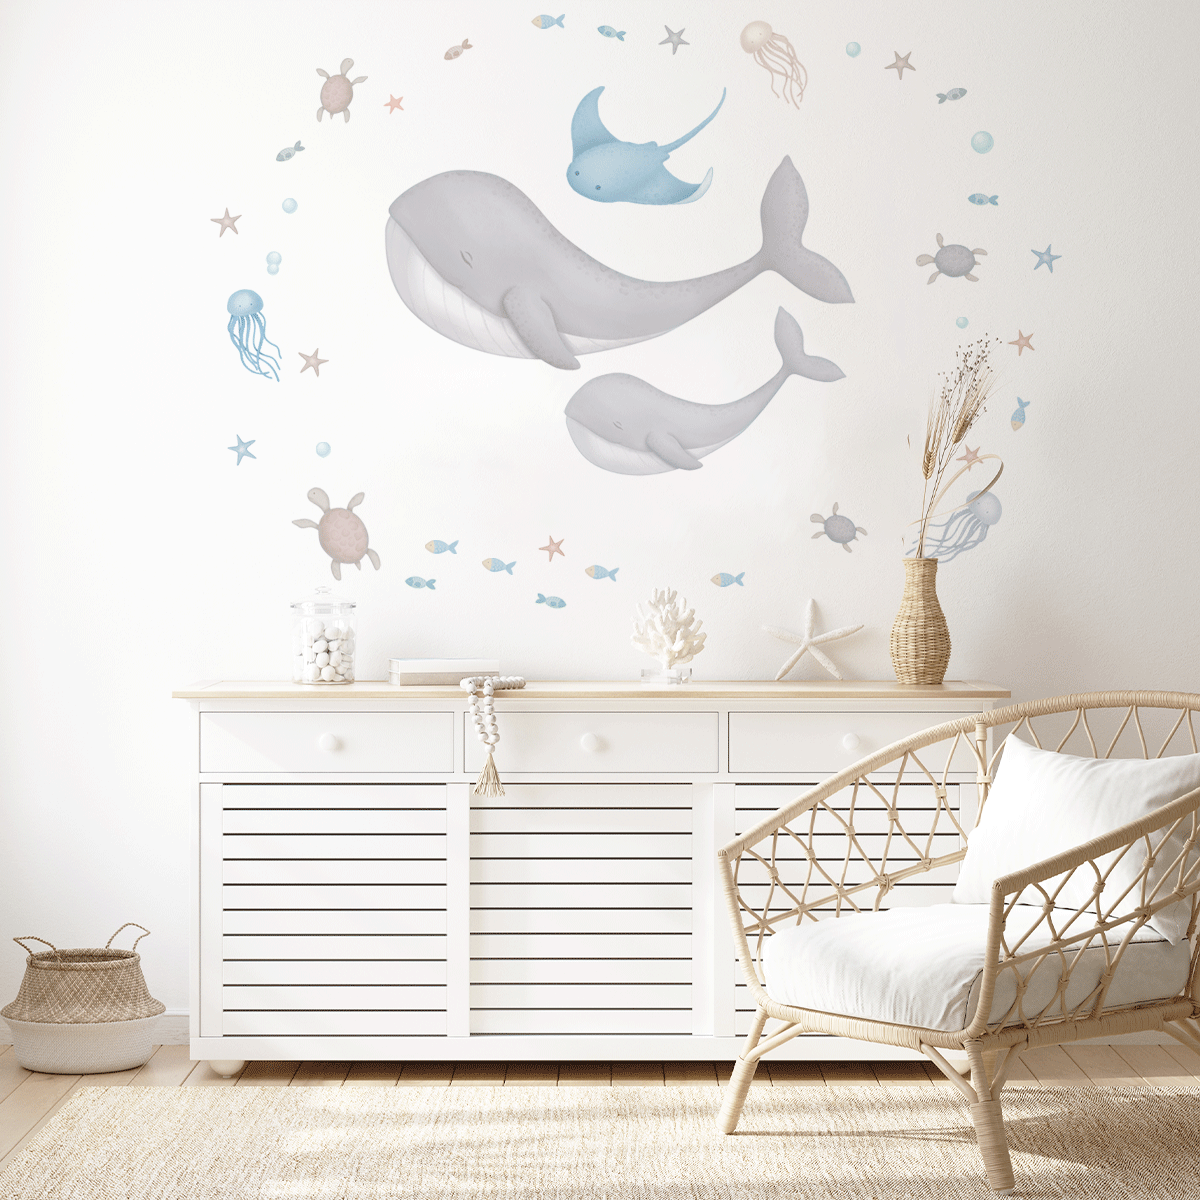 Under the sea wall stickers - Magical ocean - whales